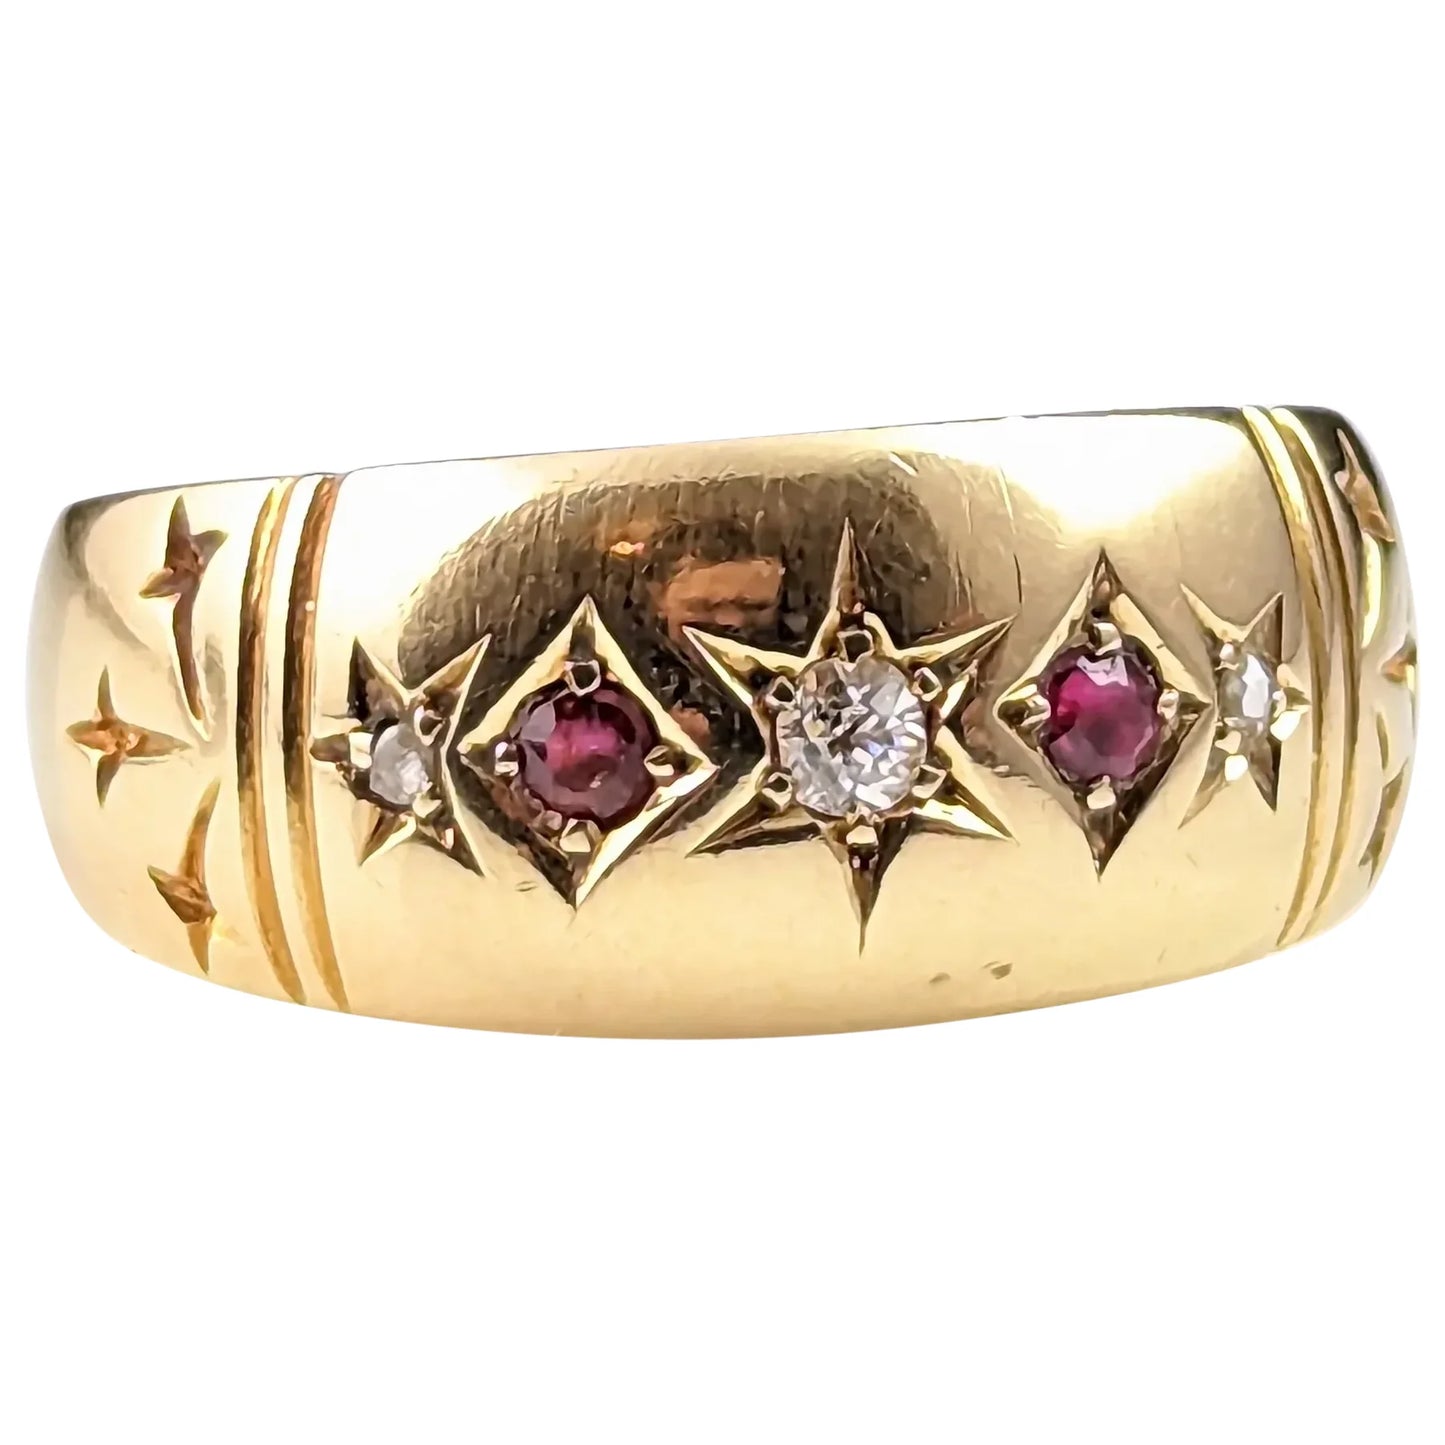 Antique Ruby and Diamond gypsy set ring, 18ct gold, Edwardian, stars